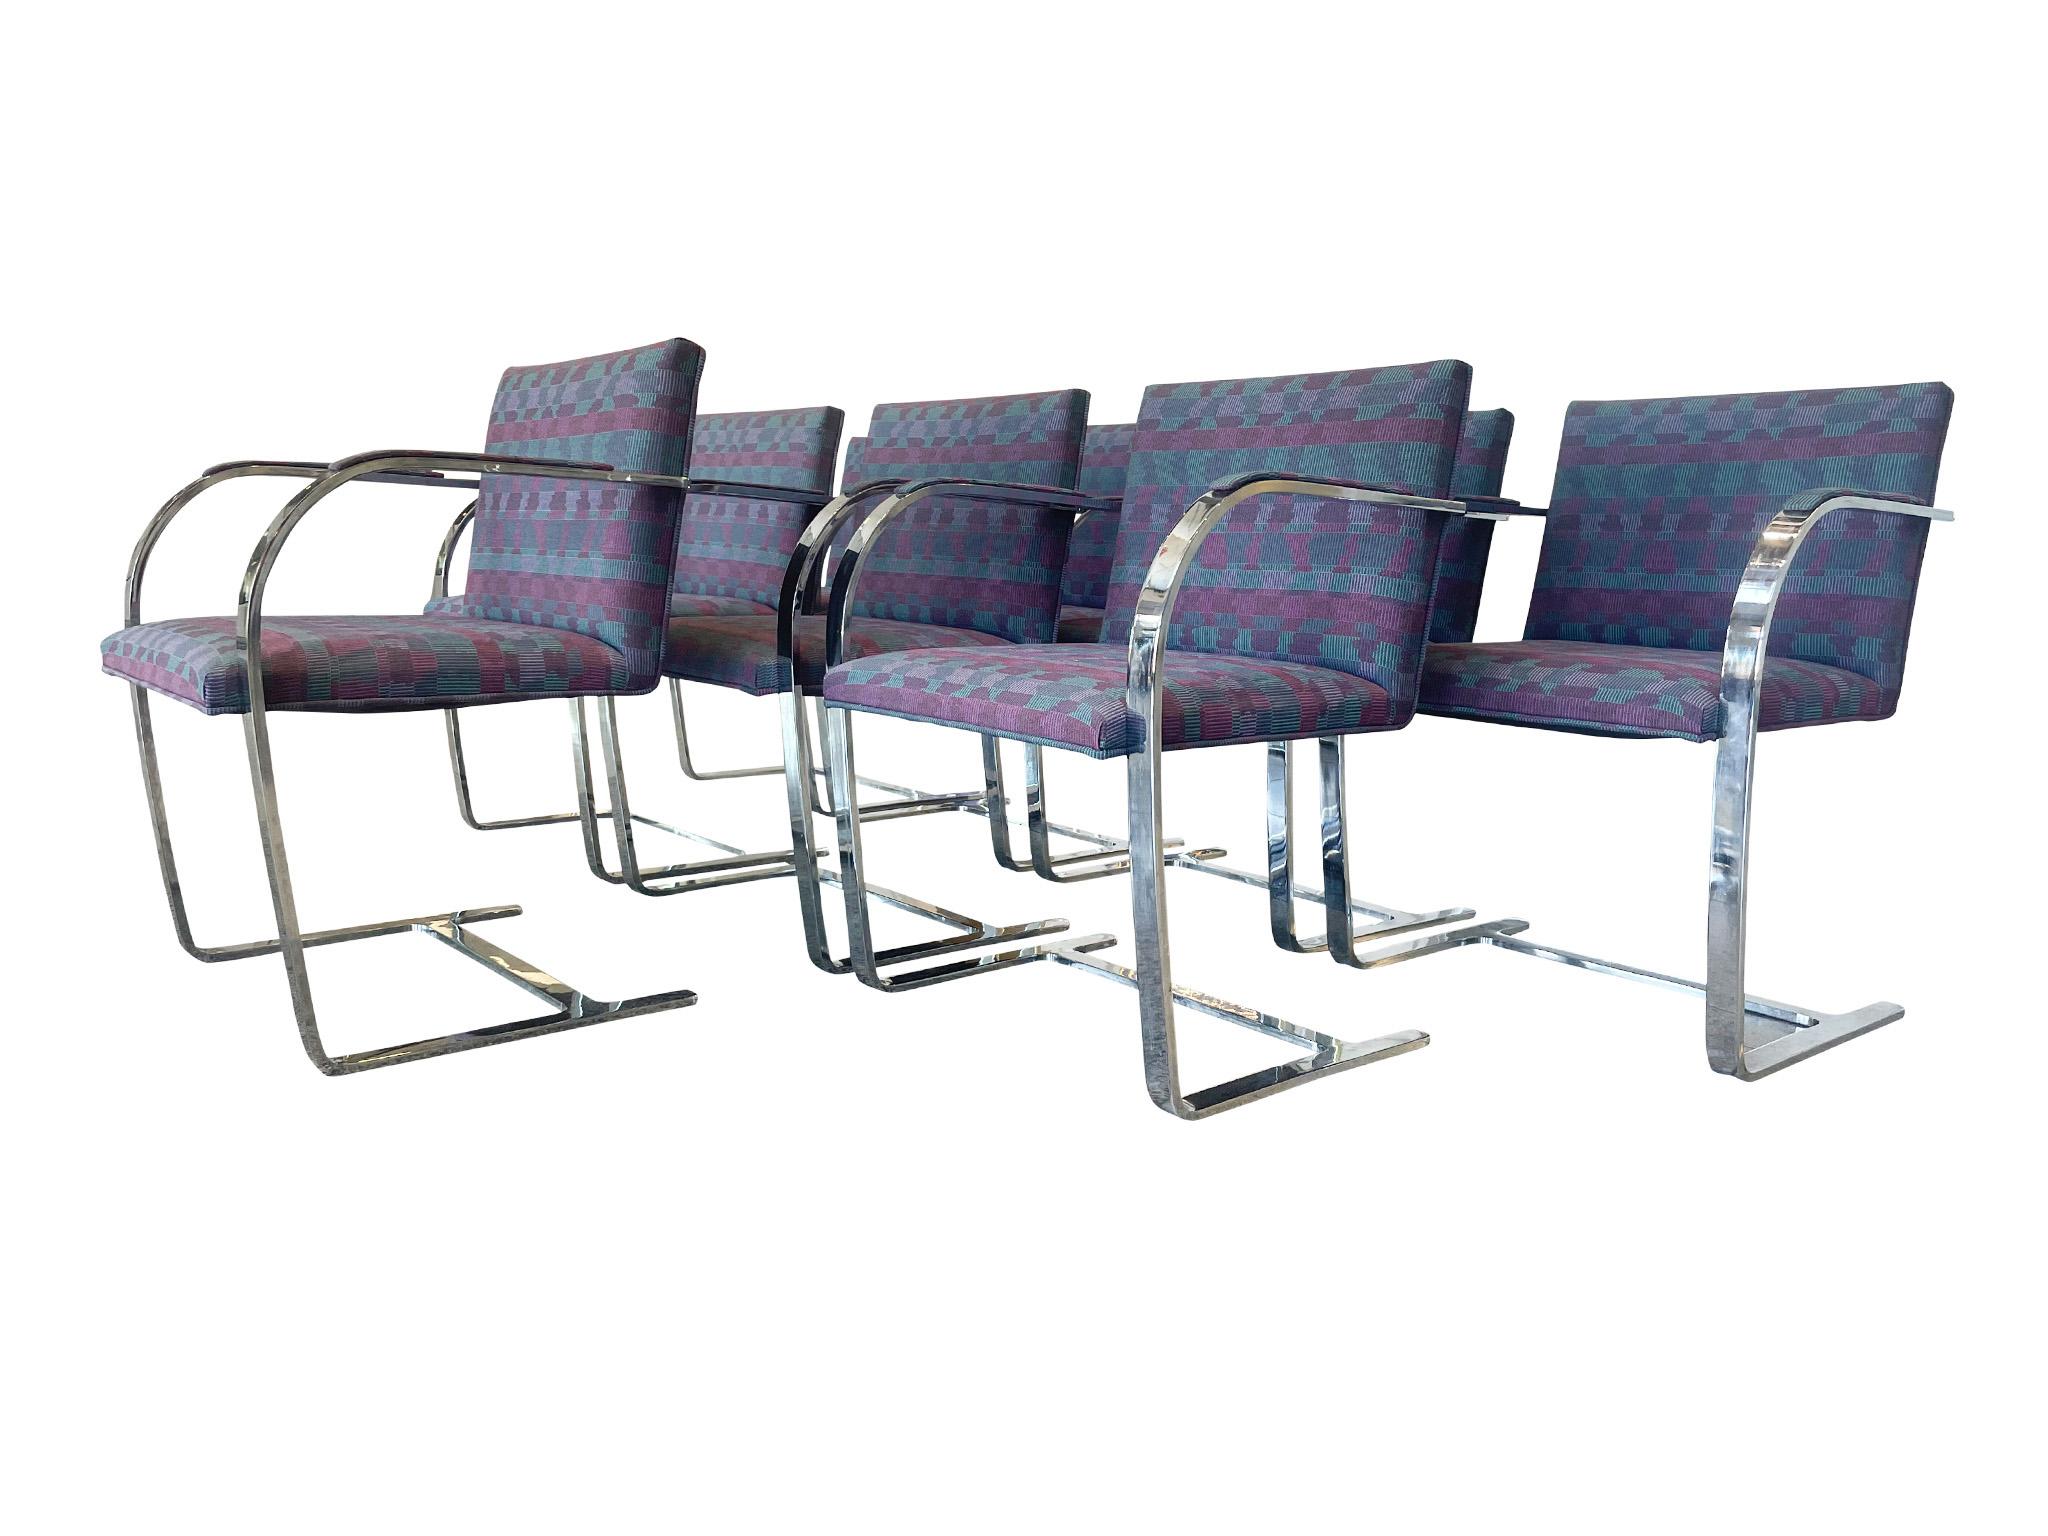 This set consists of 8 chrome armchairs attributed to Ludwig Mies van der Rohe. Originally designed in the 1930s, the Brno chairs are iconic for their cantilever structure. They are flat-bar chrome. This set has a woven upholstery with a